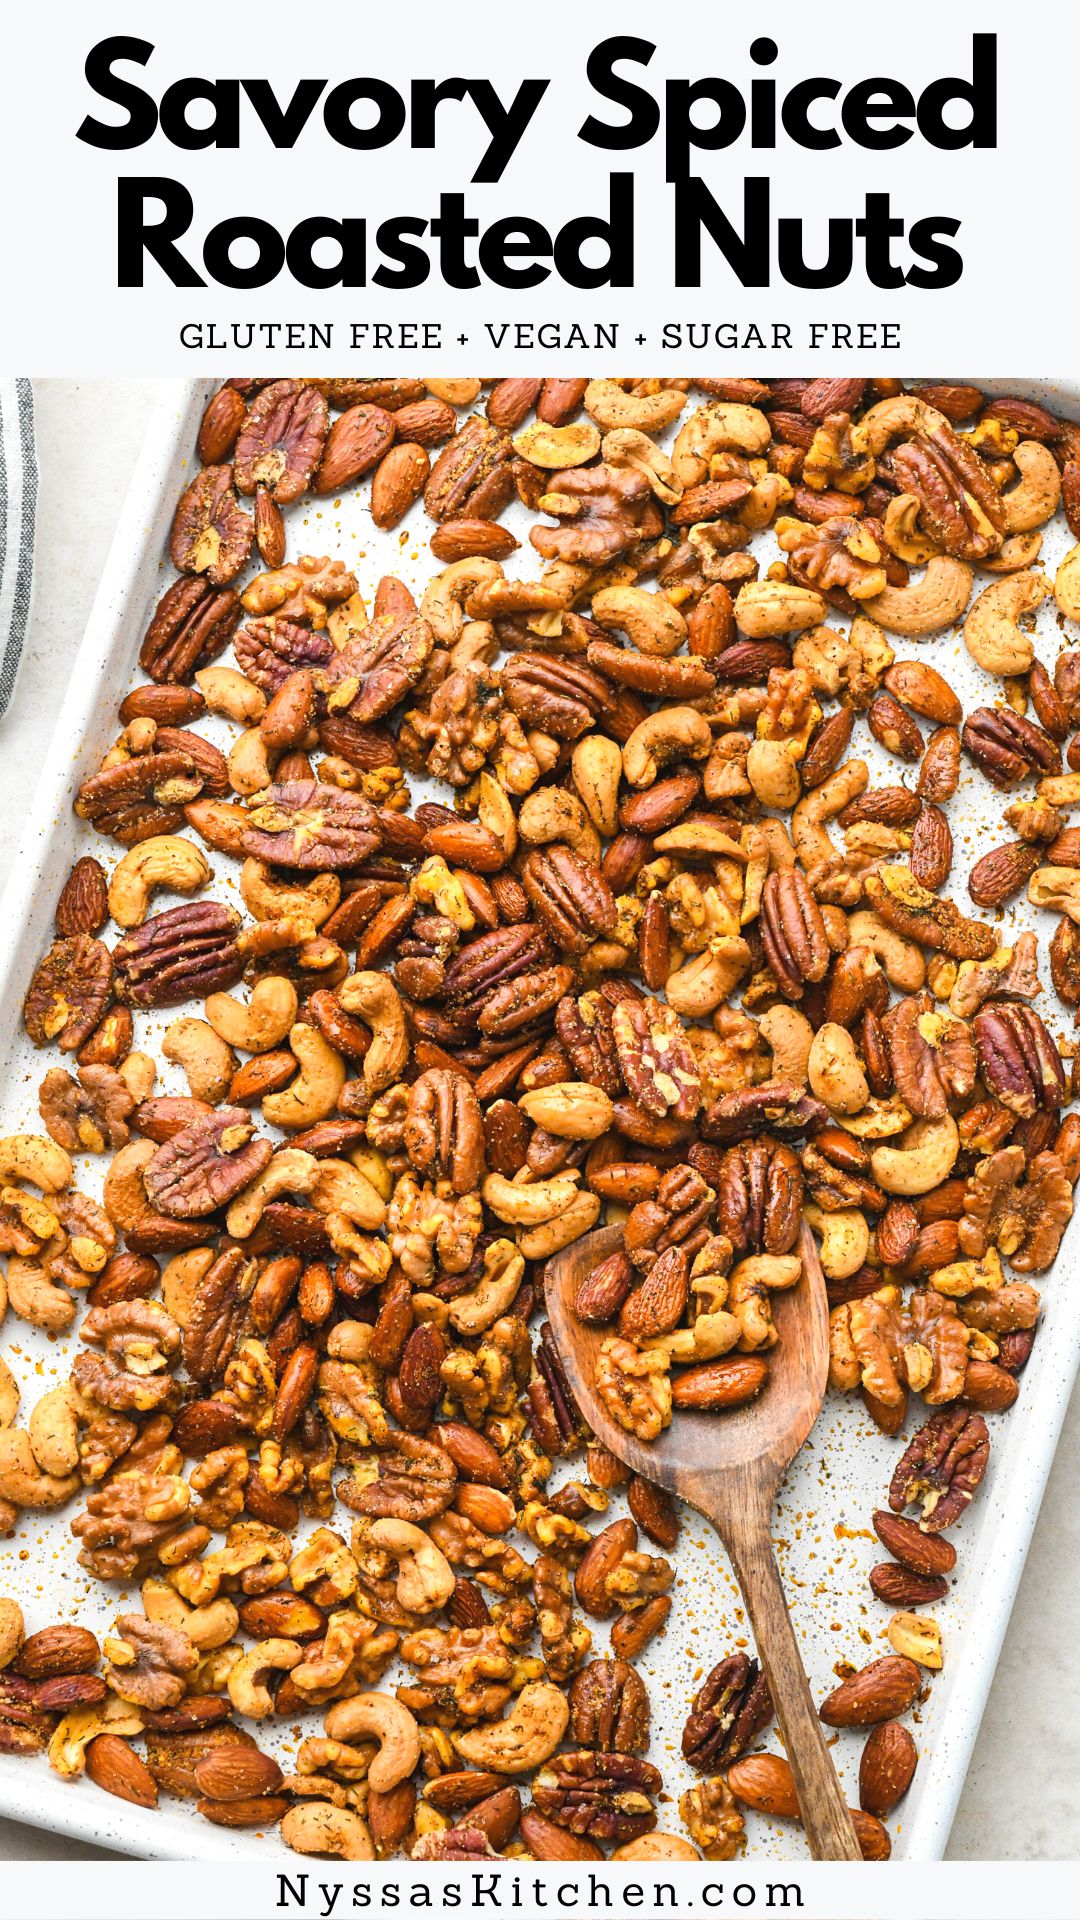 Spiced roasted nuts are the easy homemade recipe you need to tie any holiday or snack spread together. Perfect to serve for Thanksgiving, Christmas, with your favorite charcuterie spread, or as an every day snack. They are perfectly seasoned with a savory seasoning blend, only take minutes to prep and less than half and hour to roast. Made with walnuts, pecans, almonds, and cashews, but easily customizable based on your preferences. Whole30, paleo, gluten free, sugar free, and vegan (no egg whites).